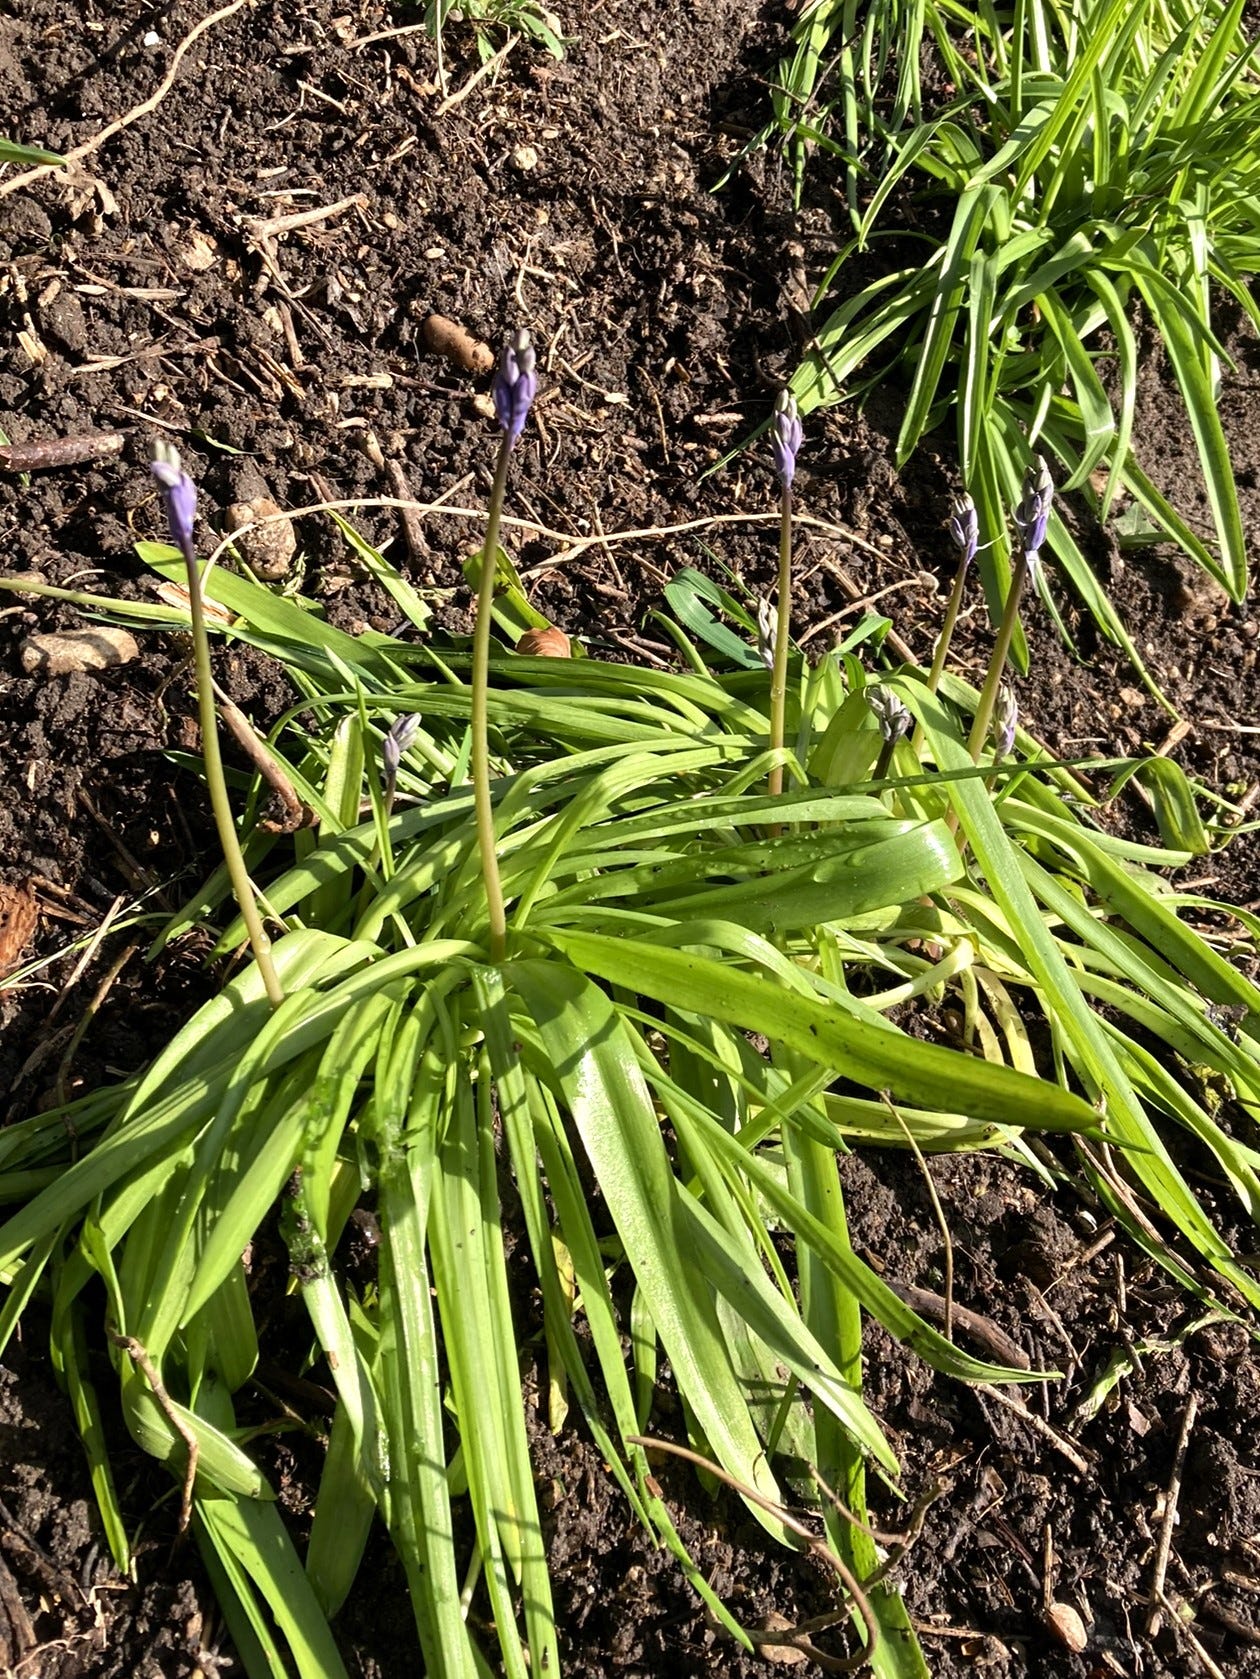 Unopened bluebells on a muddy bank. The bluebell buds are a blue-ish purple, despite the name. Their leaves are bright, light green and have a few waterdrops on them.